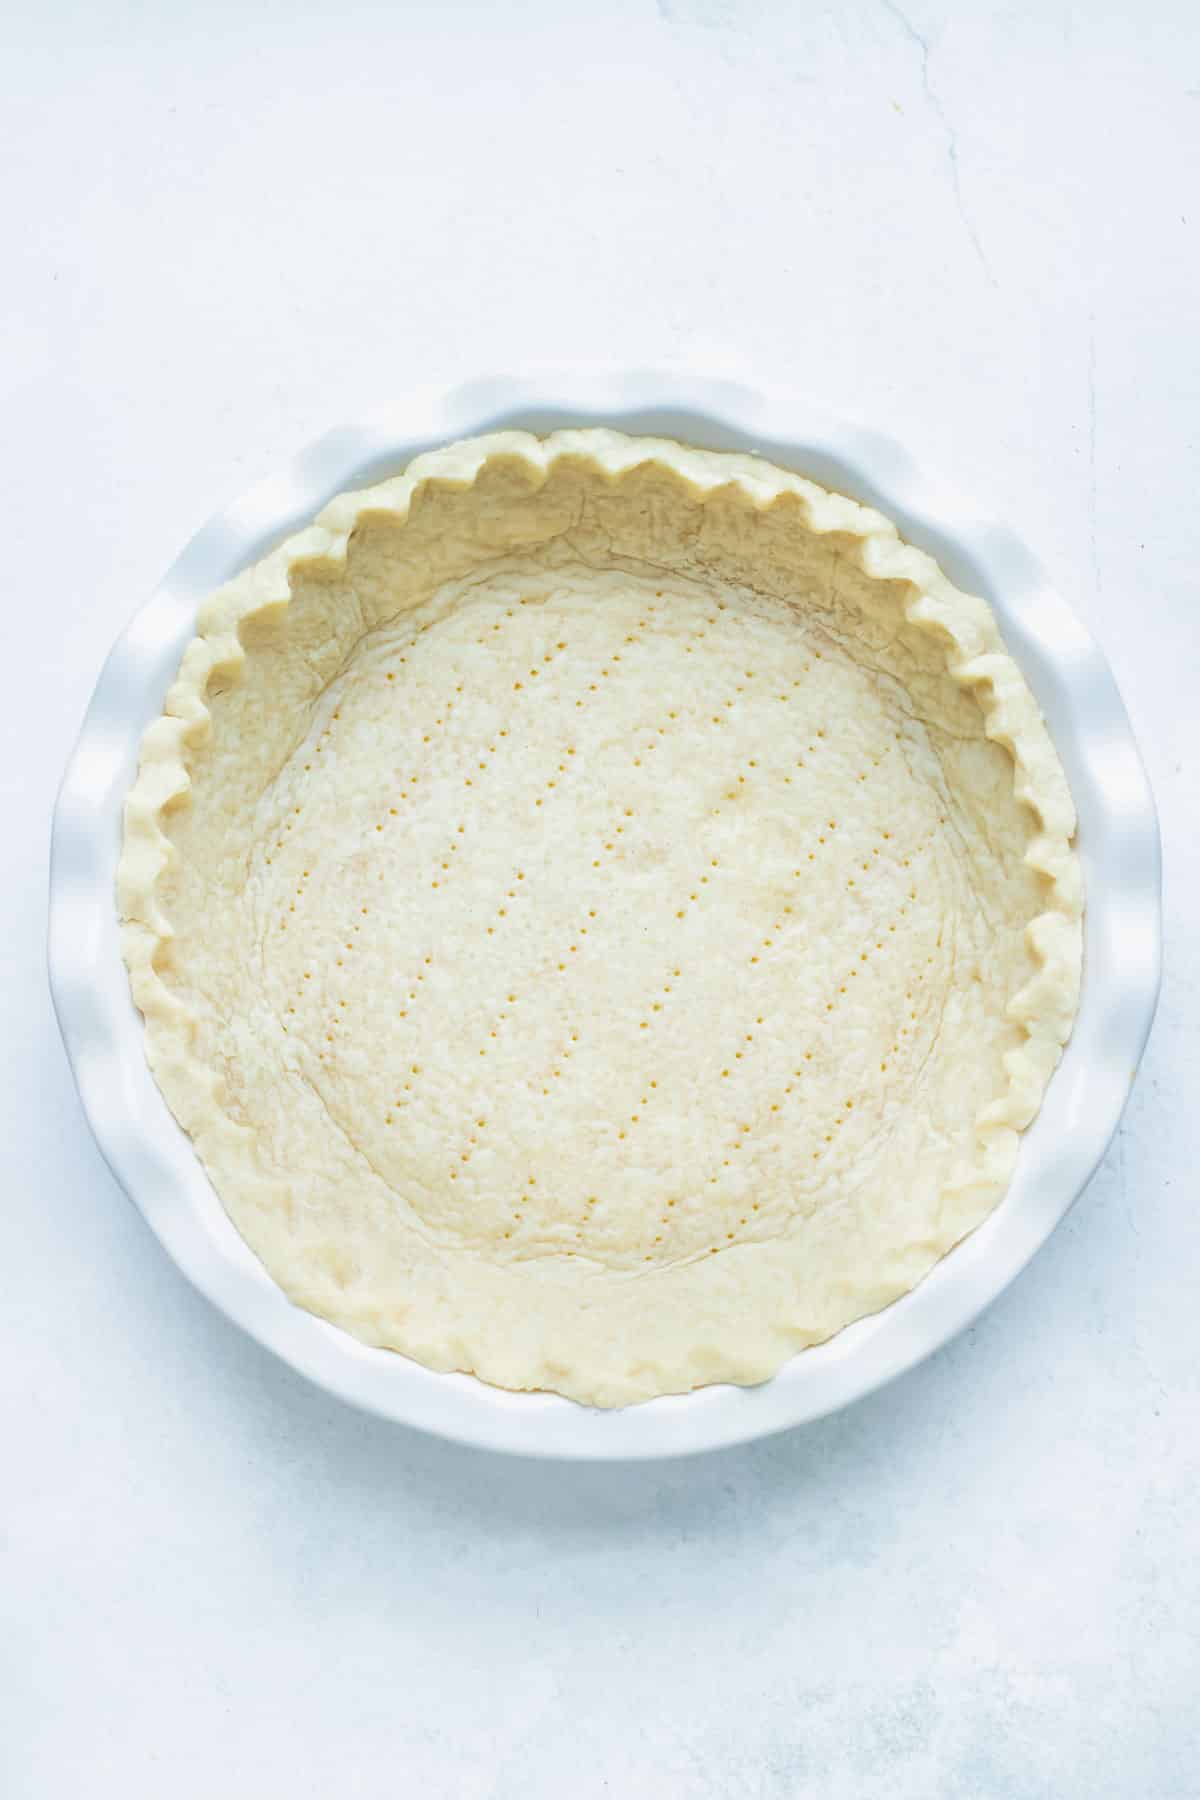 Homemade gluten-free pie crust is ready for the filling.